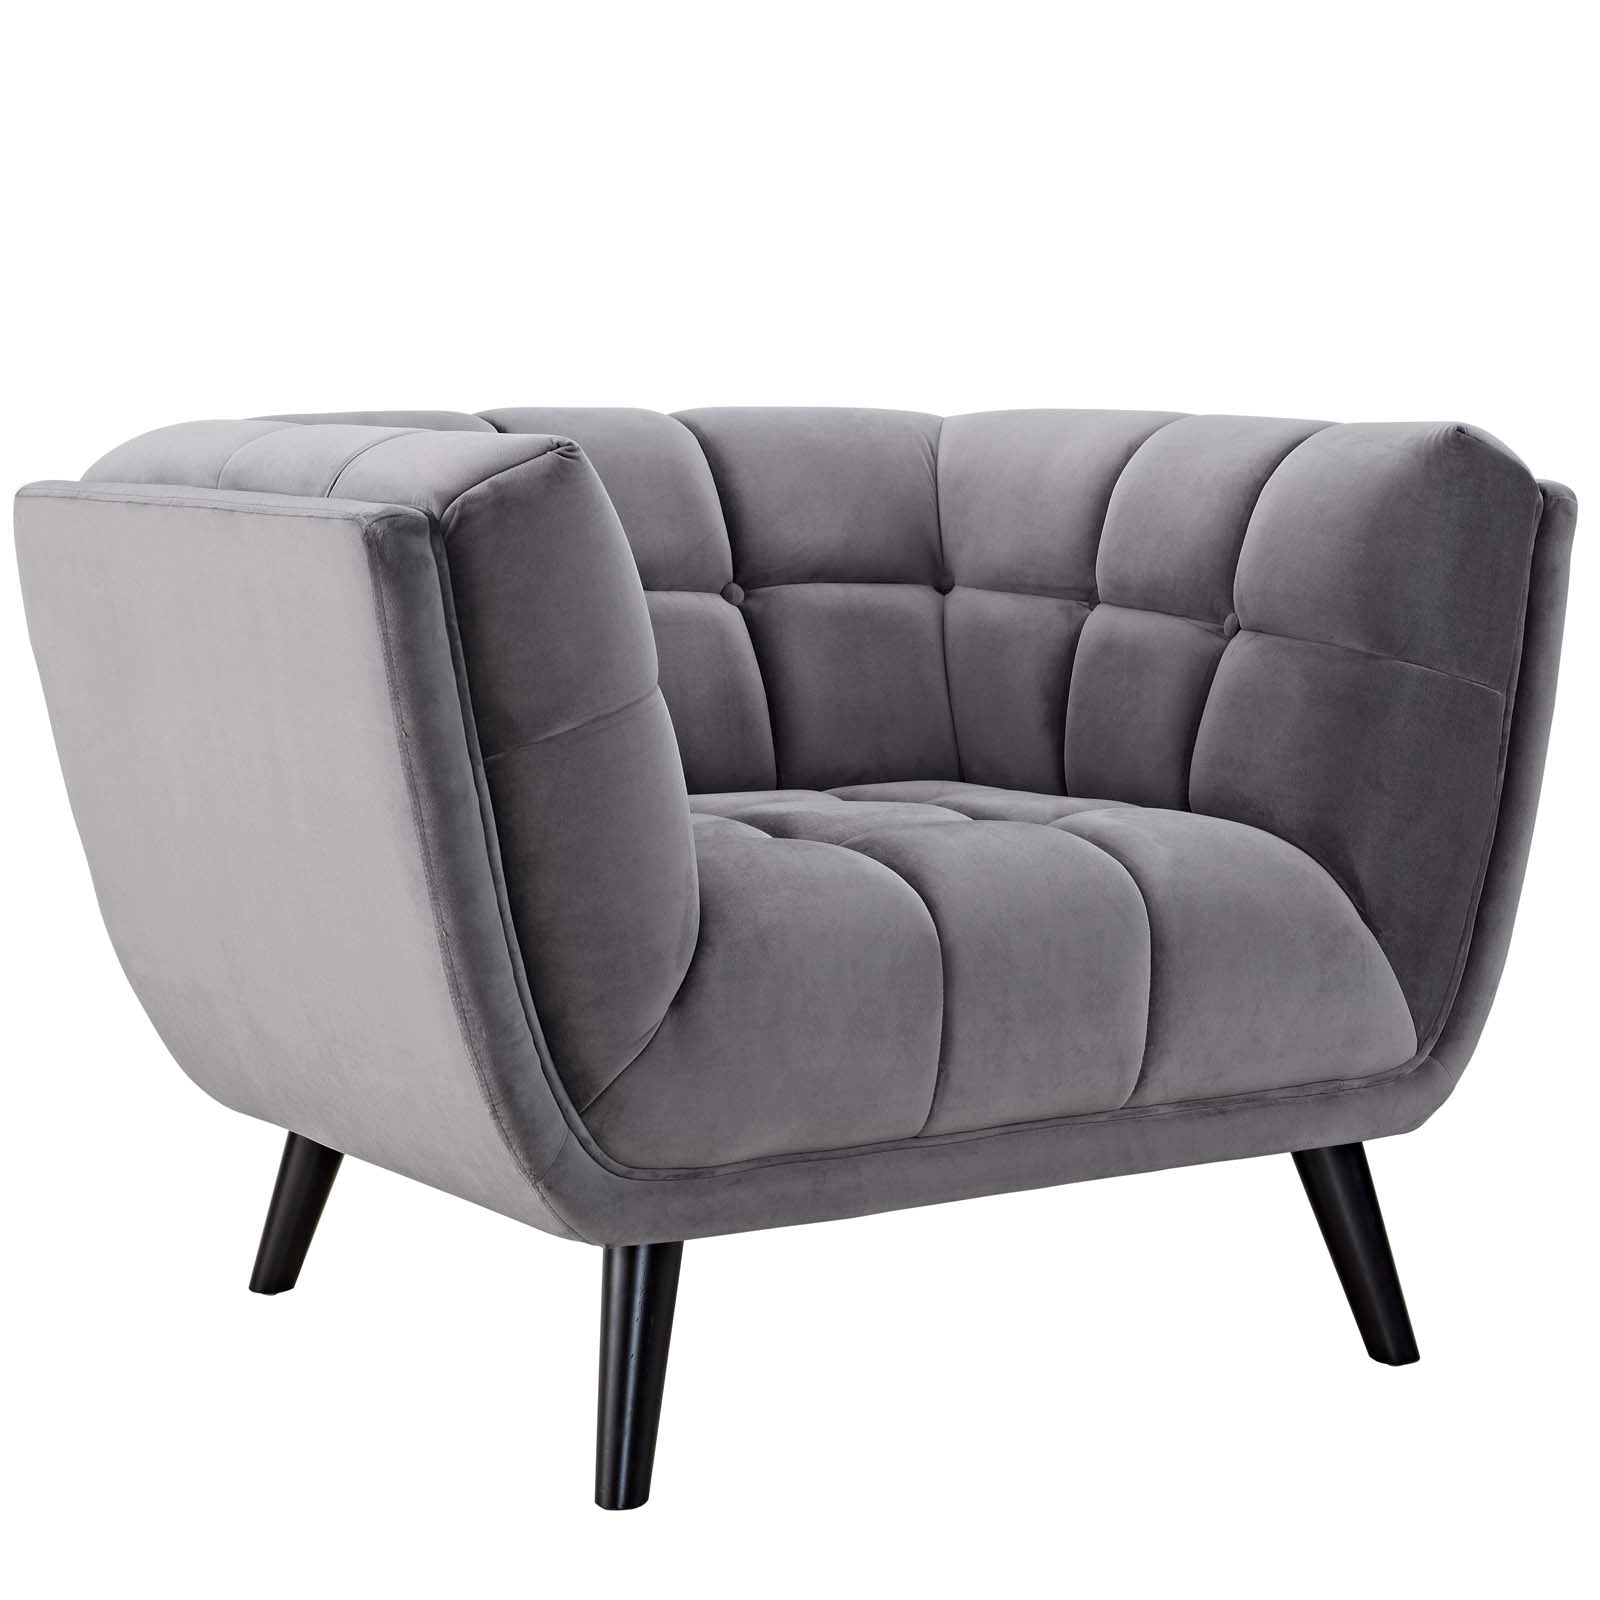 Modway Living Room Sets - Bestow 2 Piece Performance Velvet Loveseat and Armchair Set Gray